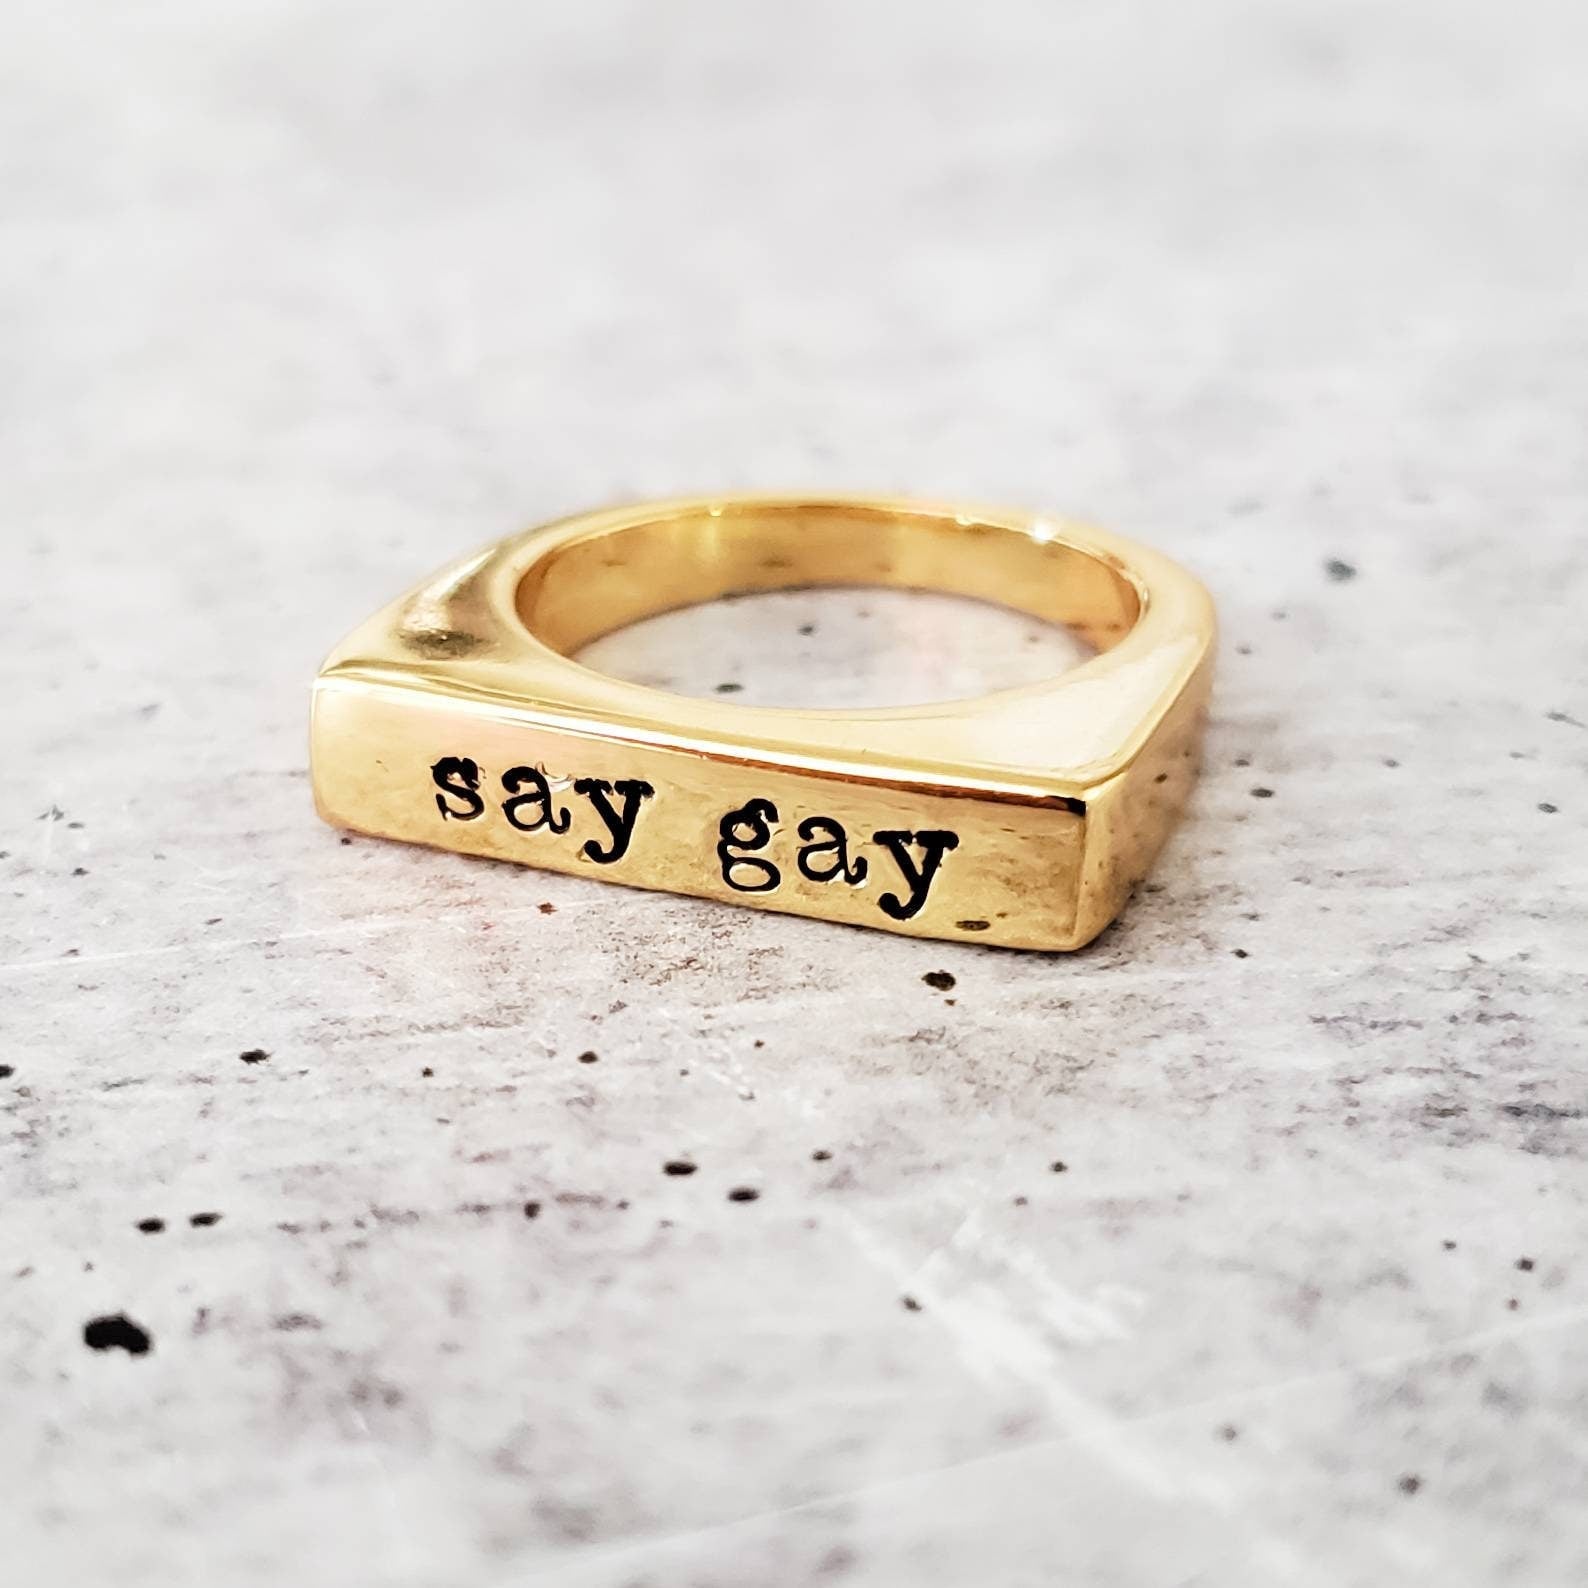 Say Gay Pride Ring -  LGBTQIA Jewelry - Political Gold Plated Ring - Personalized for Non Binary - Gay Pride Jewelry for Ally - Pride Month